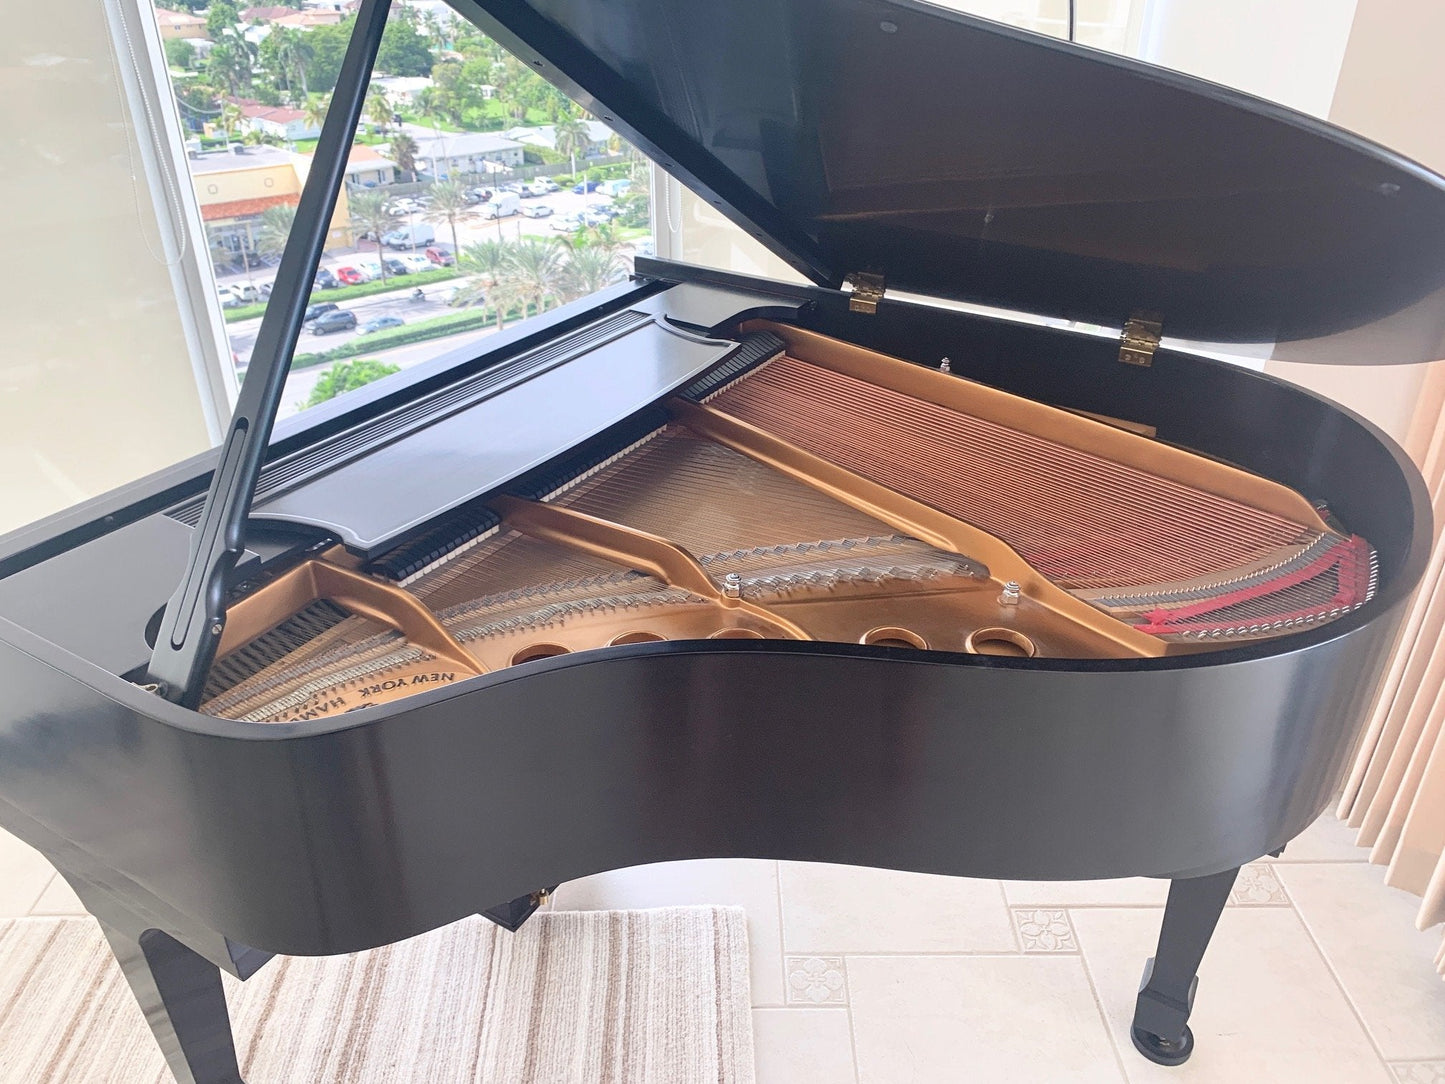 Steinway Model S Piano Purchased New in 2005